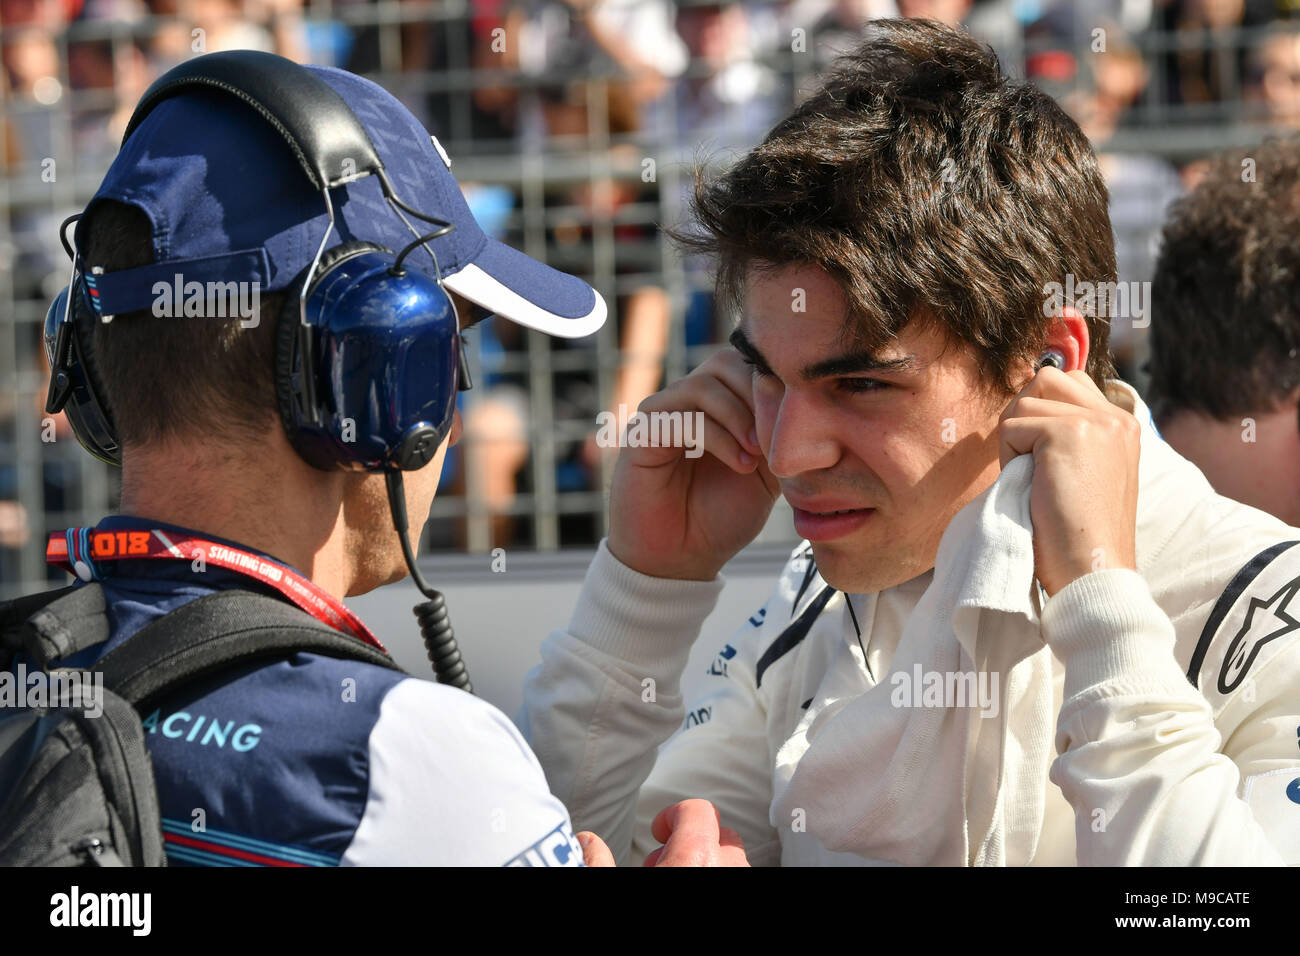 Albert Park, Melbourne, Australia. 25th Mar, 2018. Lance Stroll (CAN) #18 from the Williams Martini Racing team on the grid prior to the start of the 2018 Australian Formula One Grand Prix at Albert Park, Melbourne, Australia. Sydney Low/Cal Sport Media/Alamy Live News Stock Photo